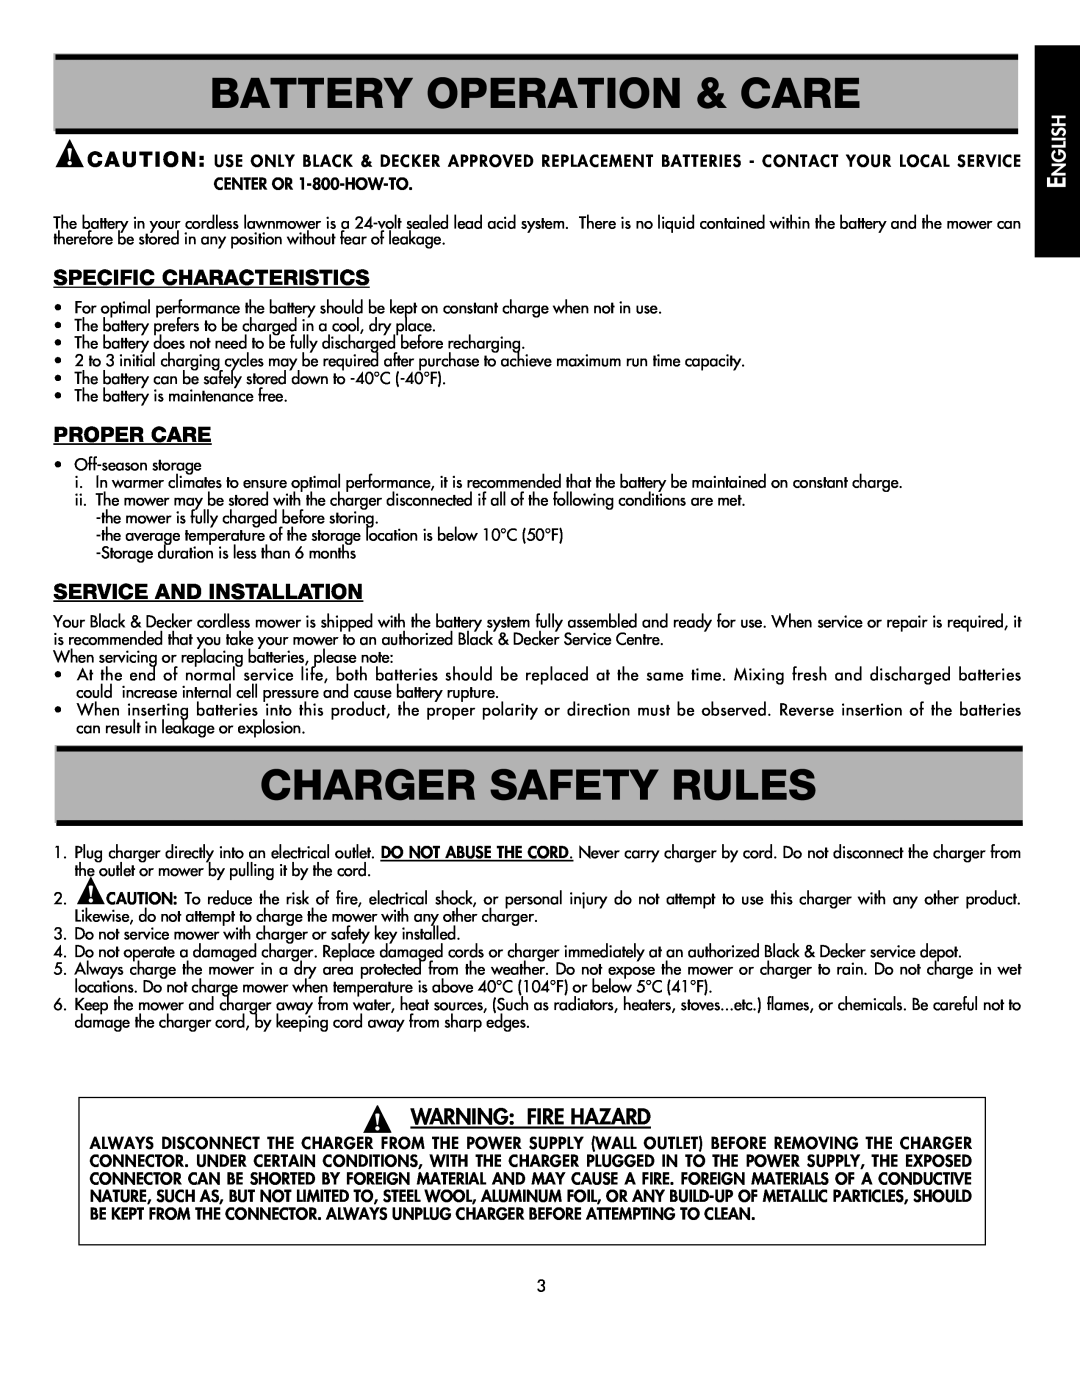 Black & Decker CMM1000 Battery Operation & Care, Charger Safety Rules, Specific Characteristics, Proper Care, English 